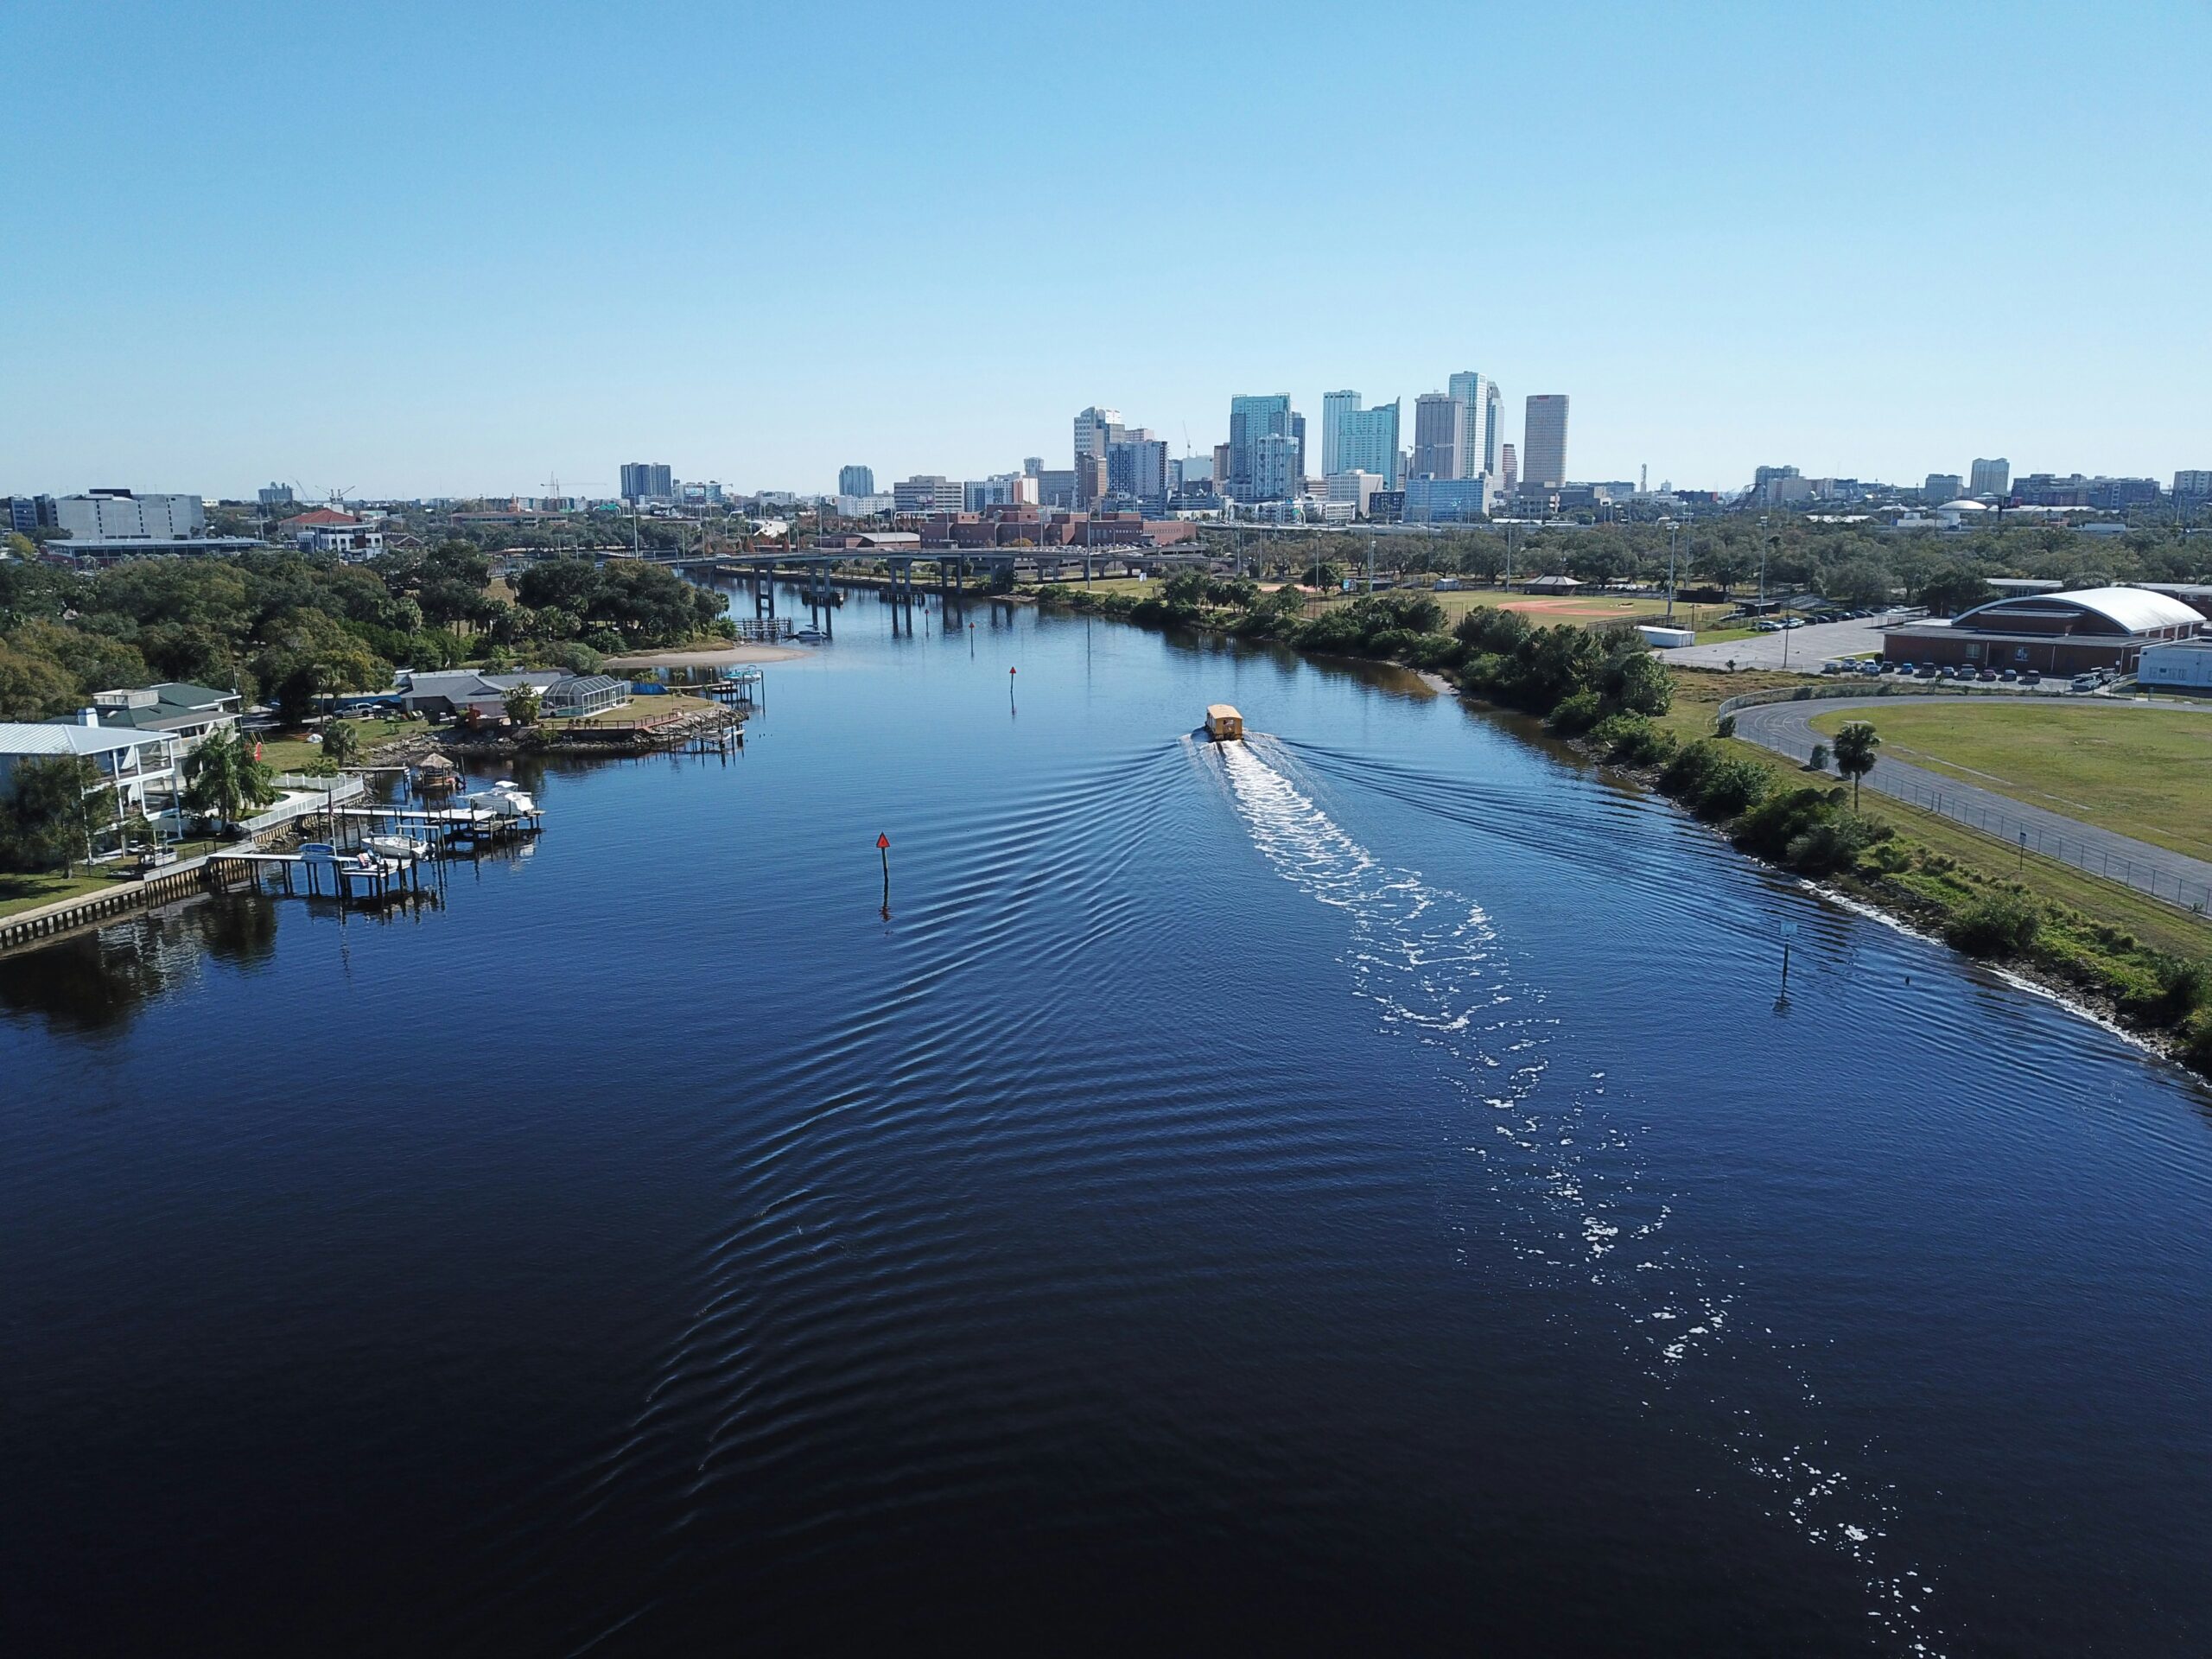 Tampa is one of the best places to live in Florida for beachfront living. Pictured: A drone view of Tampa